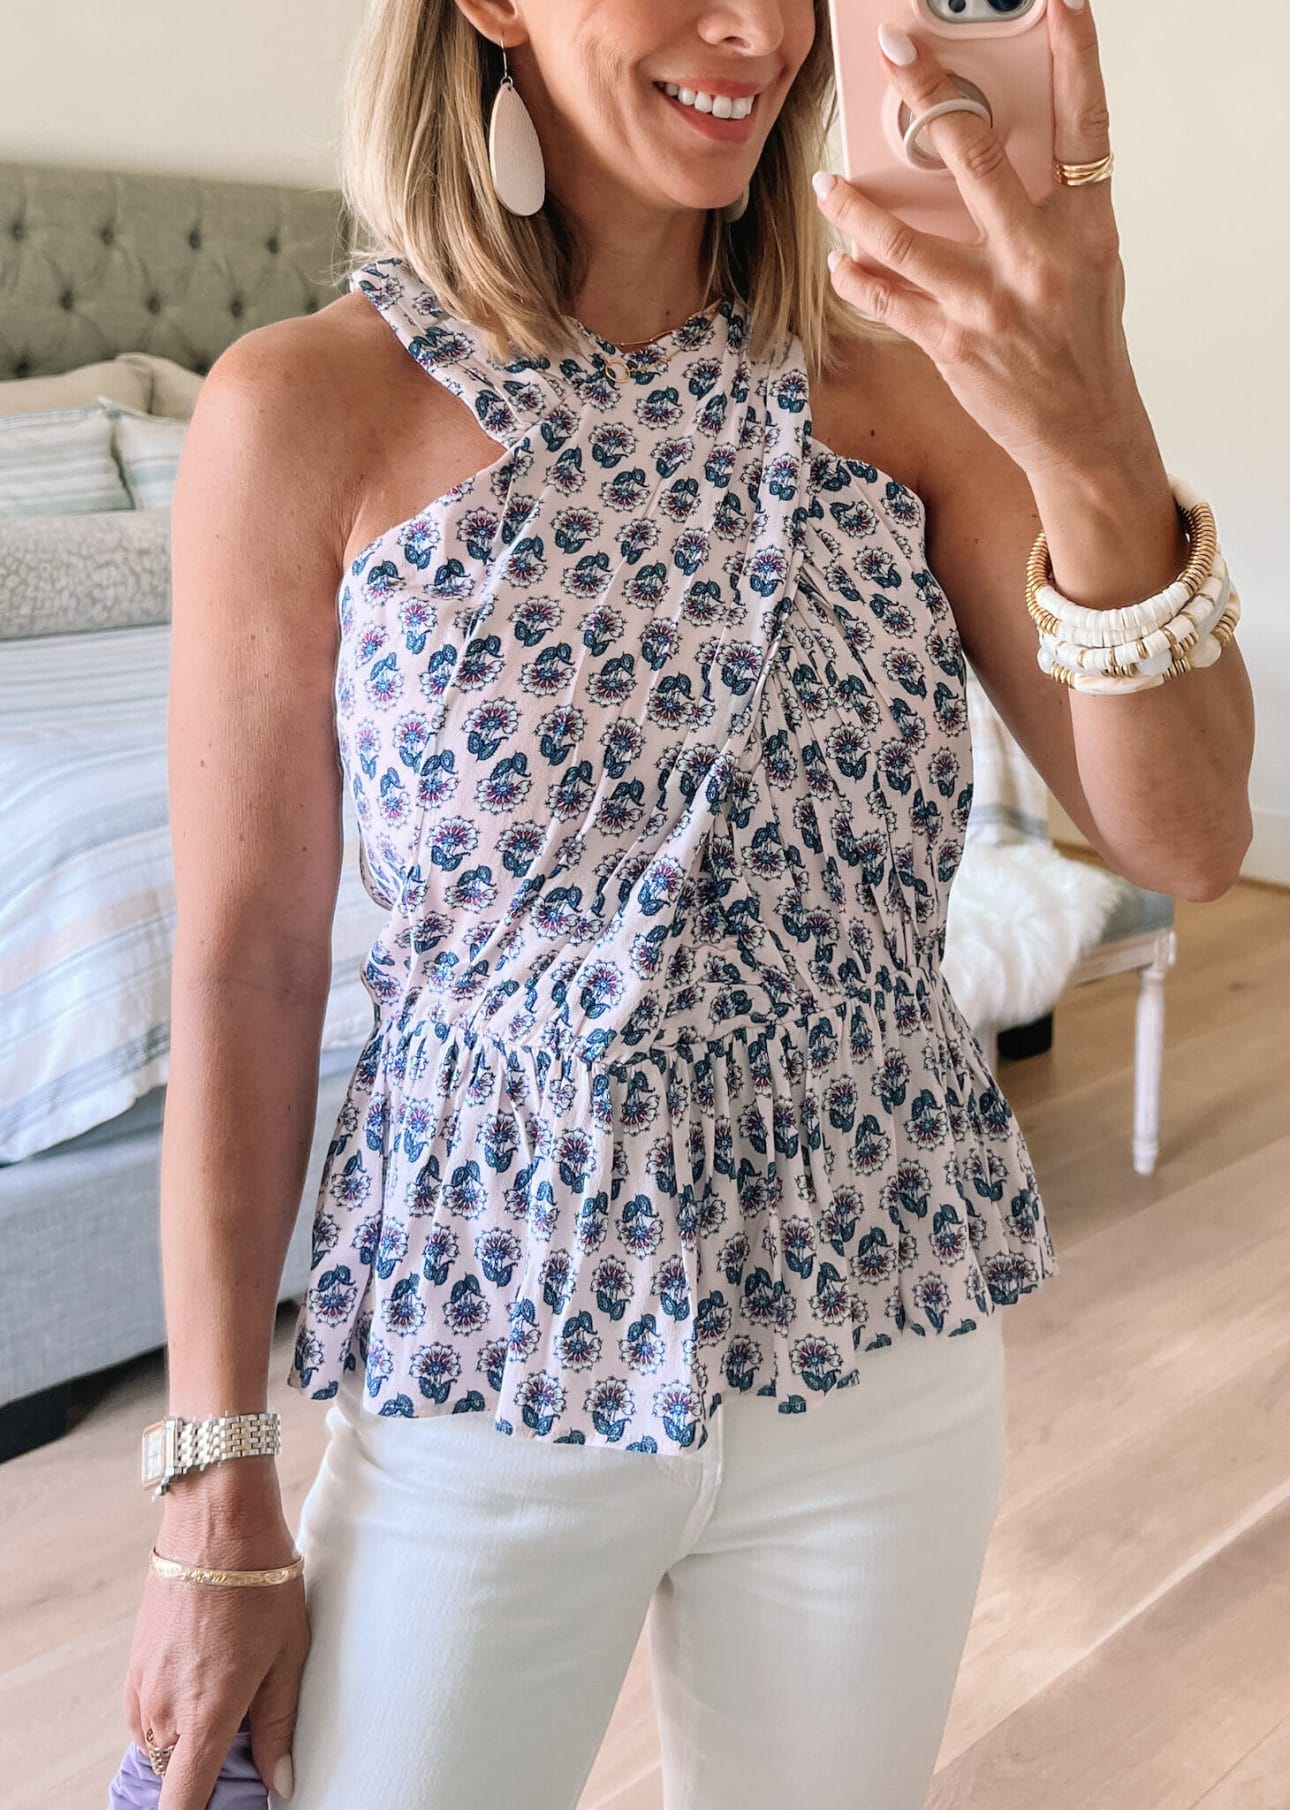 Floral Top, White jeans